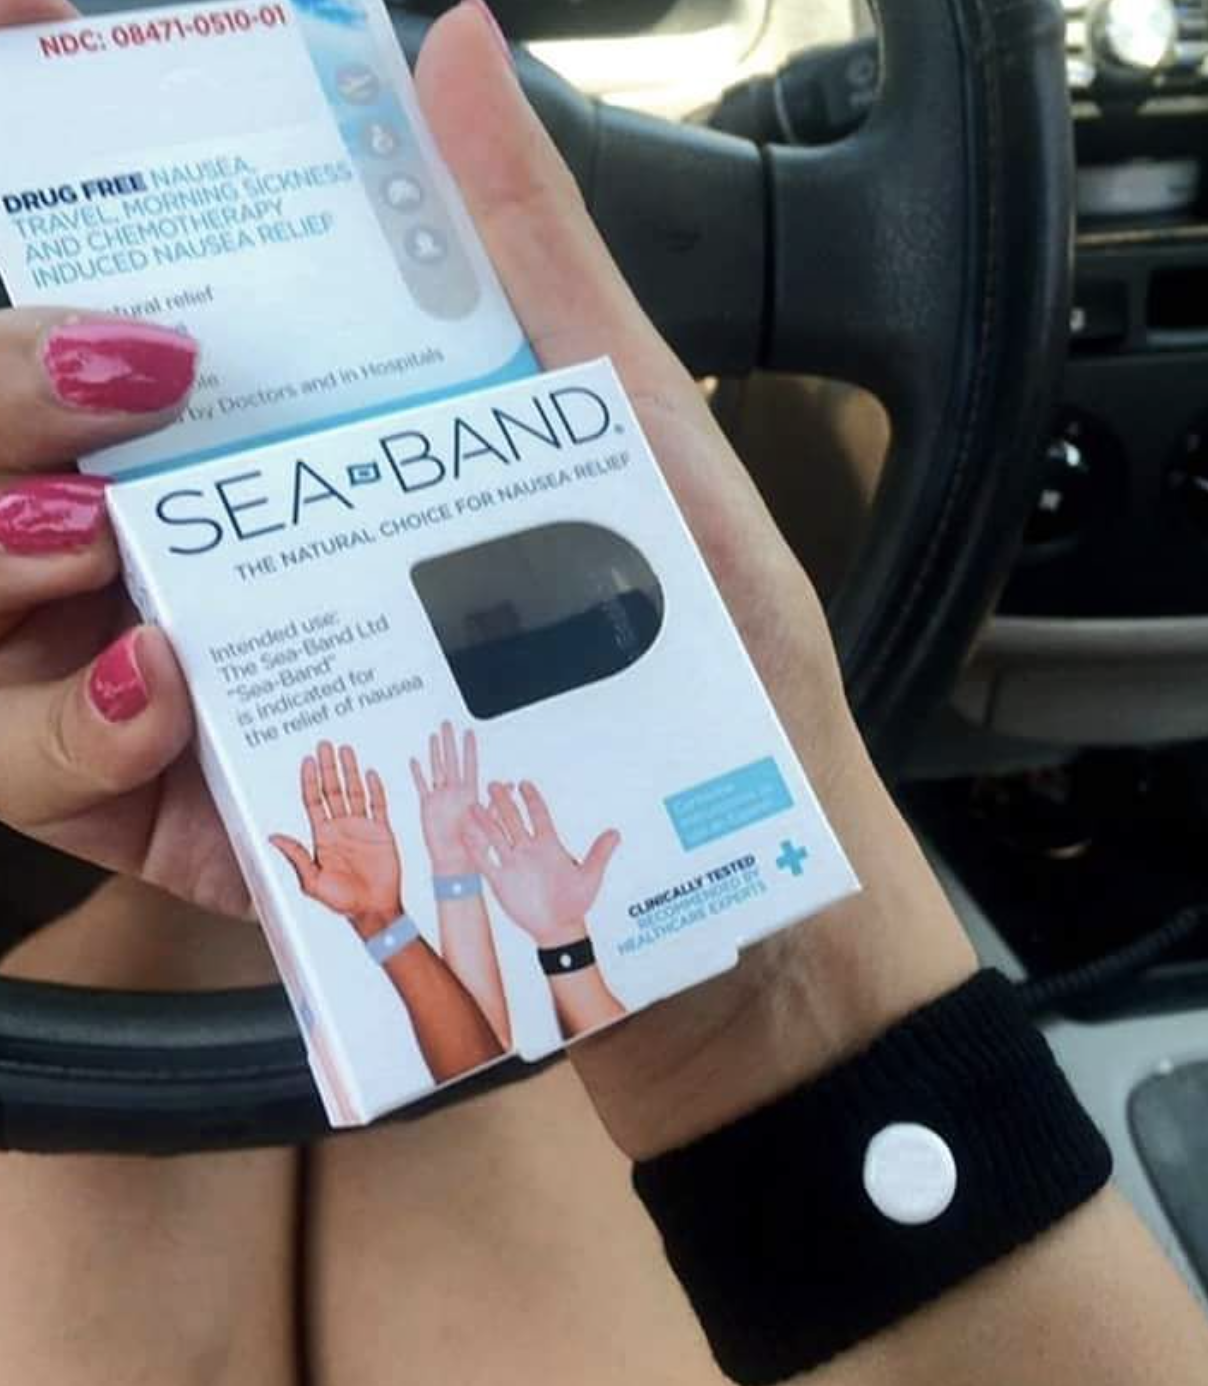 Someone wearing a Sea-band on their wrist while holding up the packaging